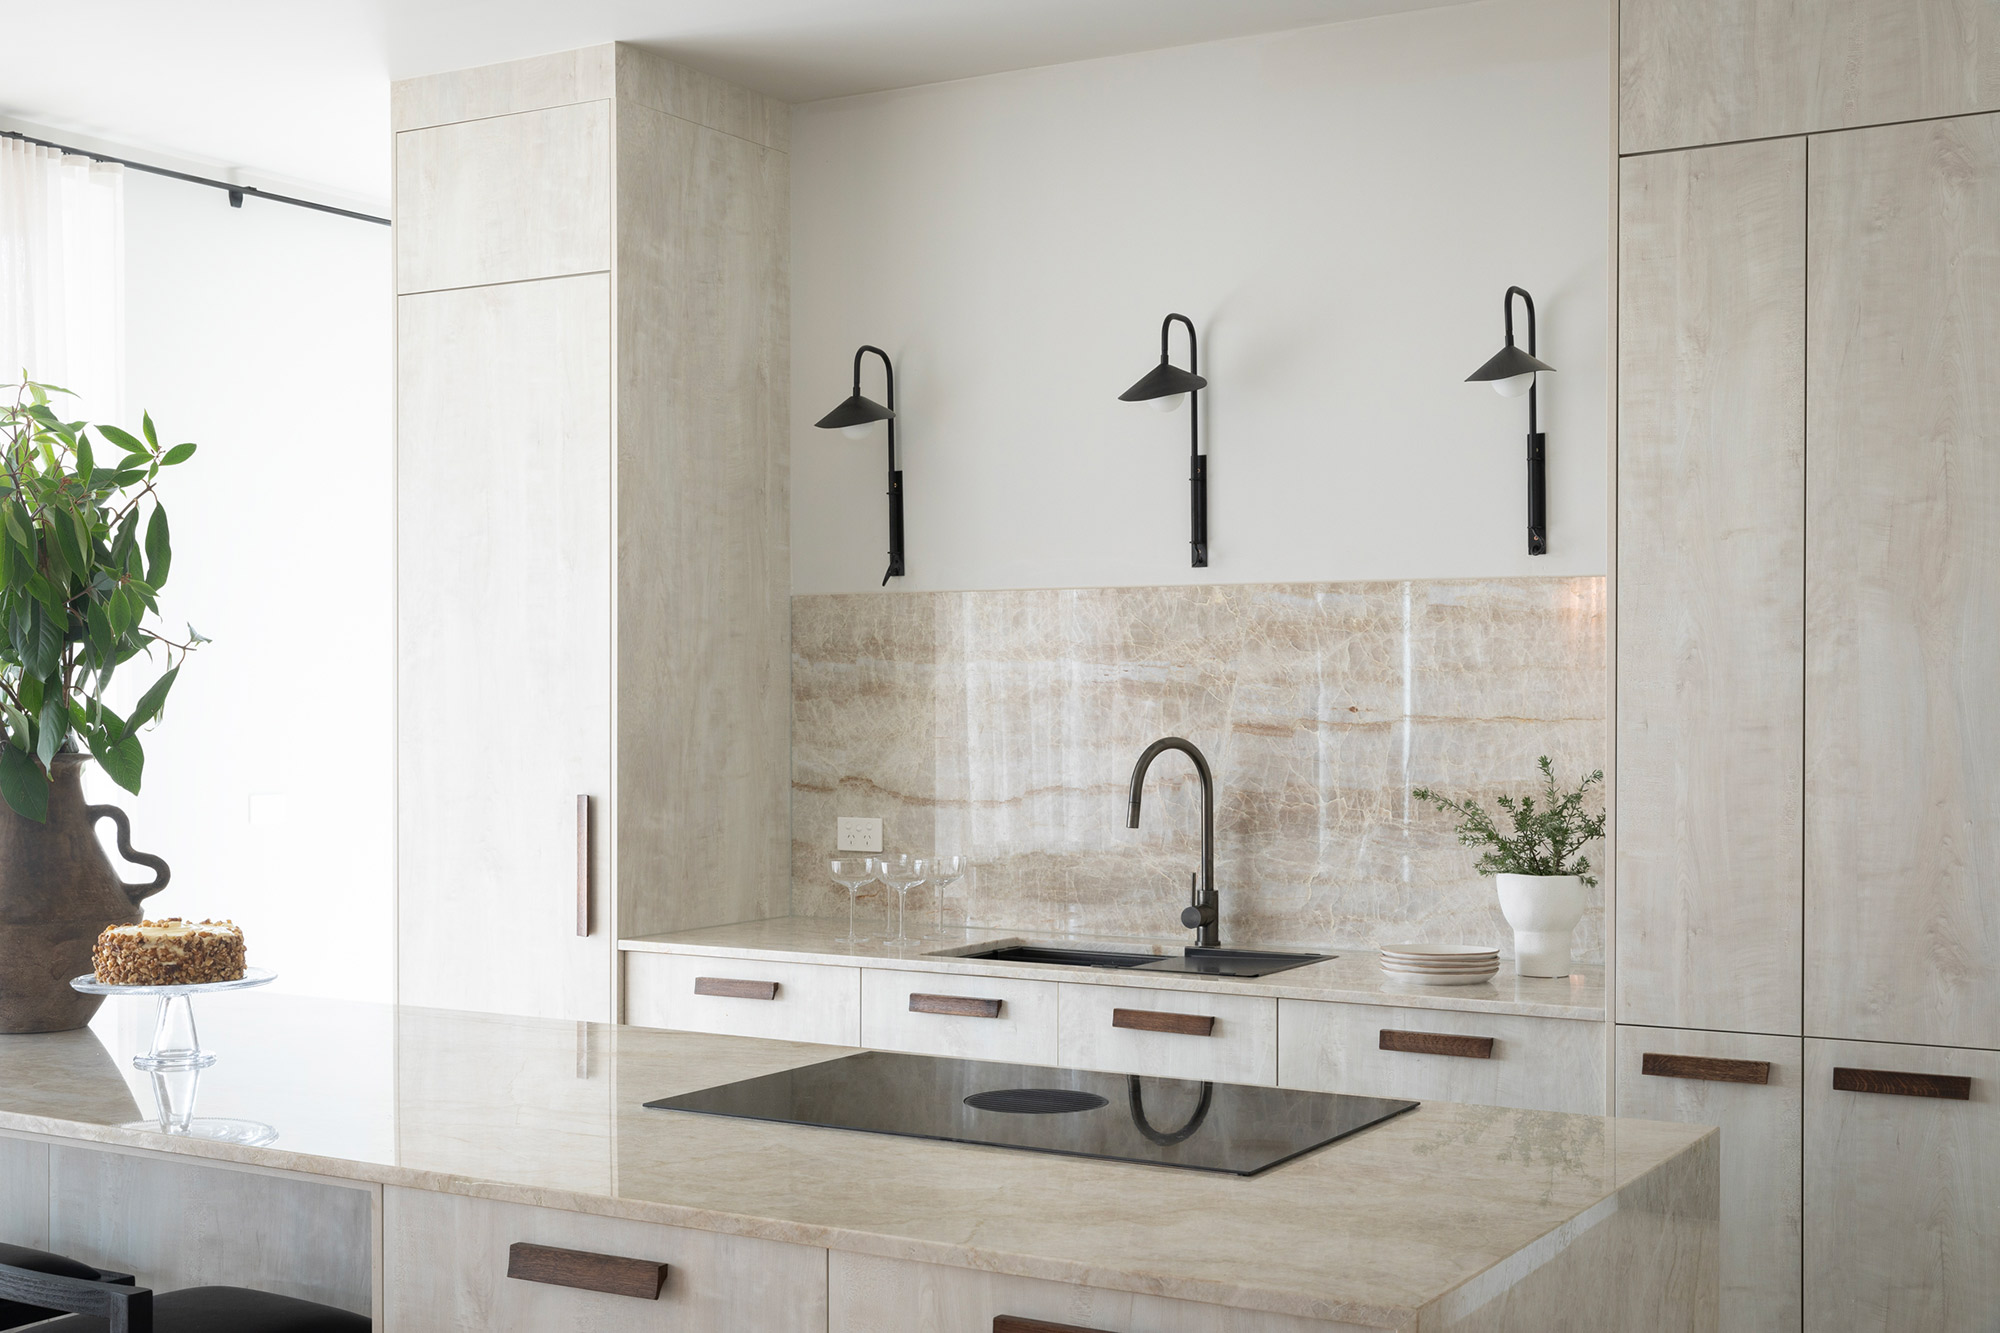 Image of The block house 4 in A minimalist, sculptural and unique kitchen thanks to Sensa natural stone - Cosentino